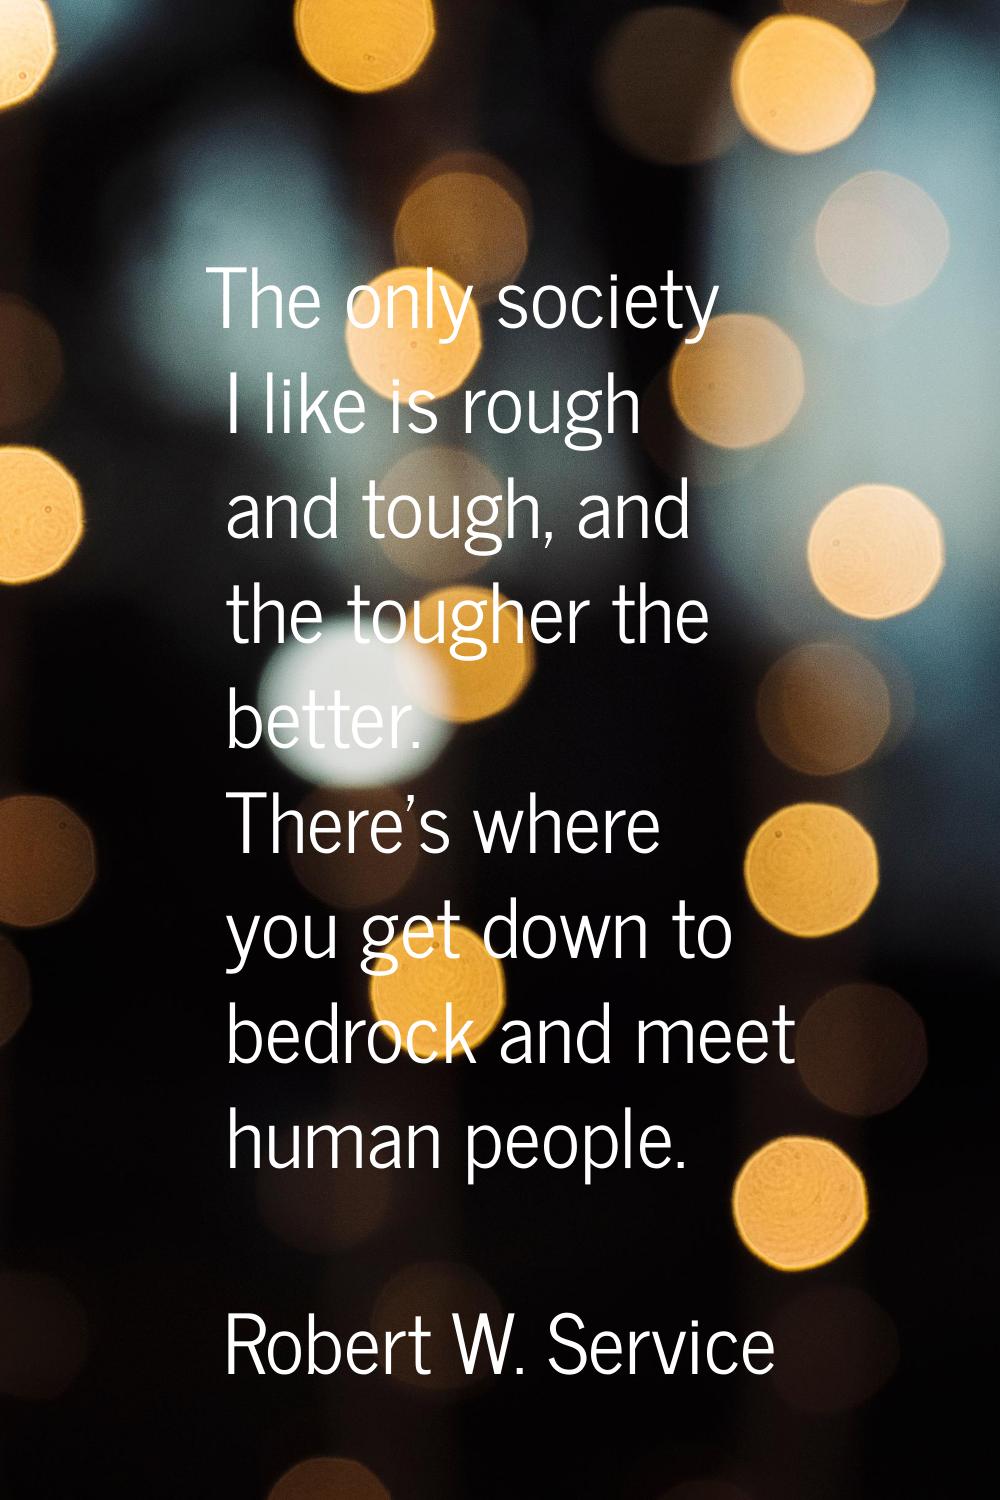 The only society I like is rough and tough, and the tougher the better. There's where you get down 